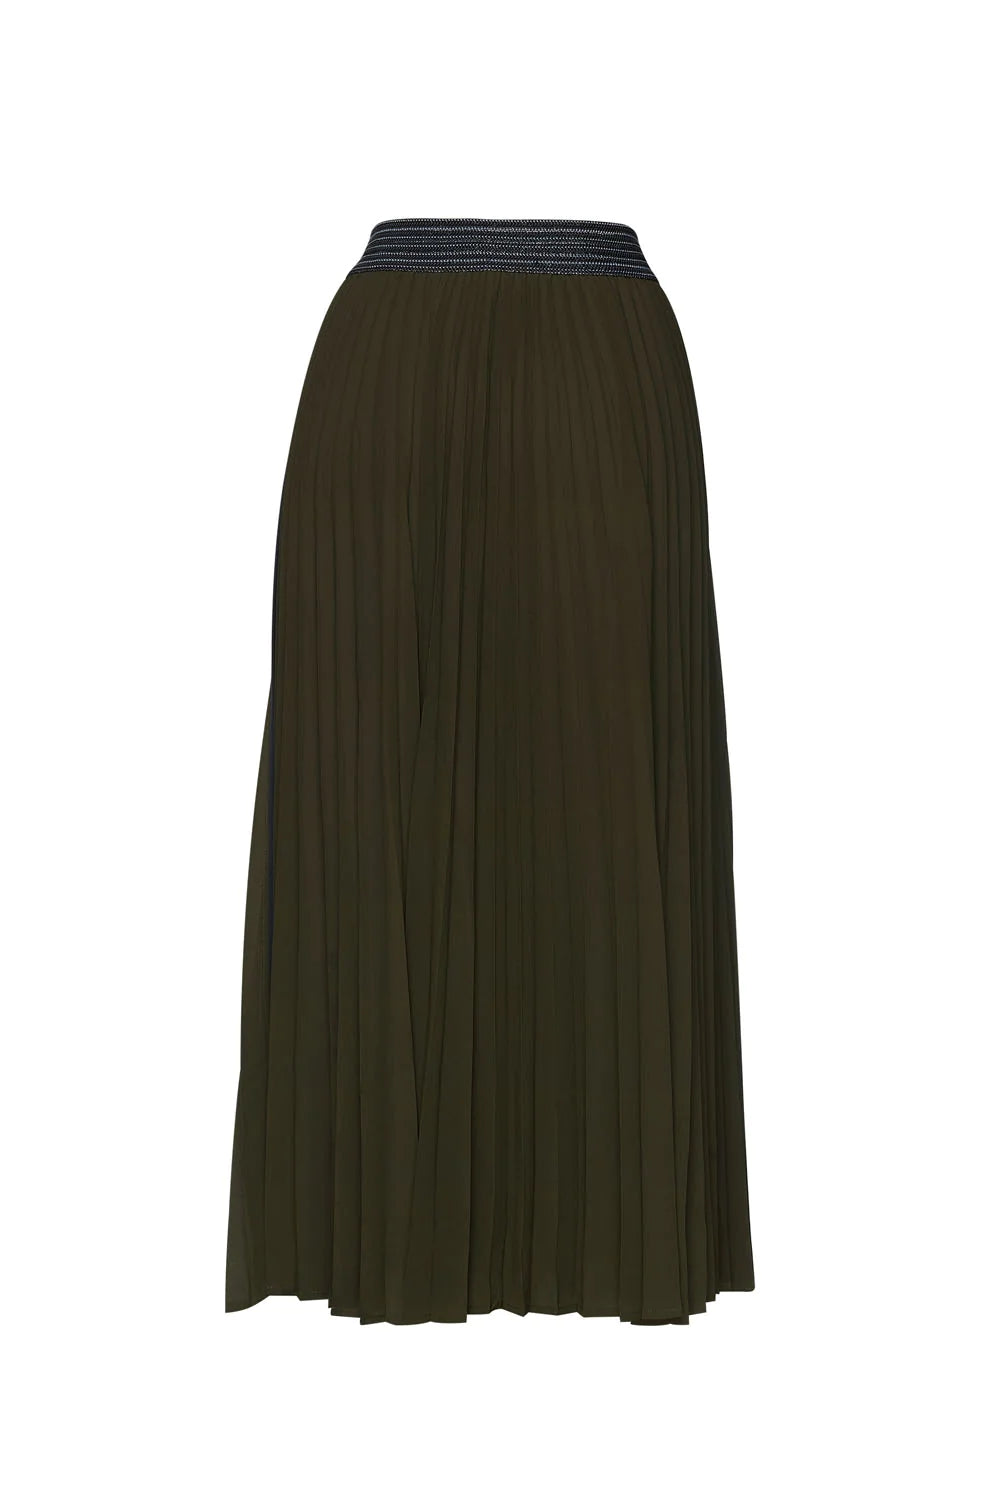 Madly Sweetly - Just Pleat It Skirt (Olive)